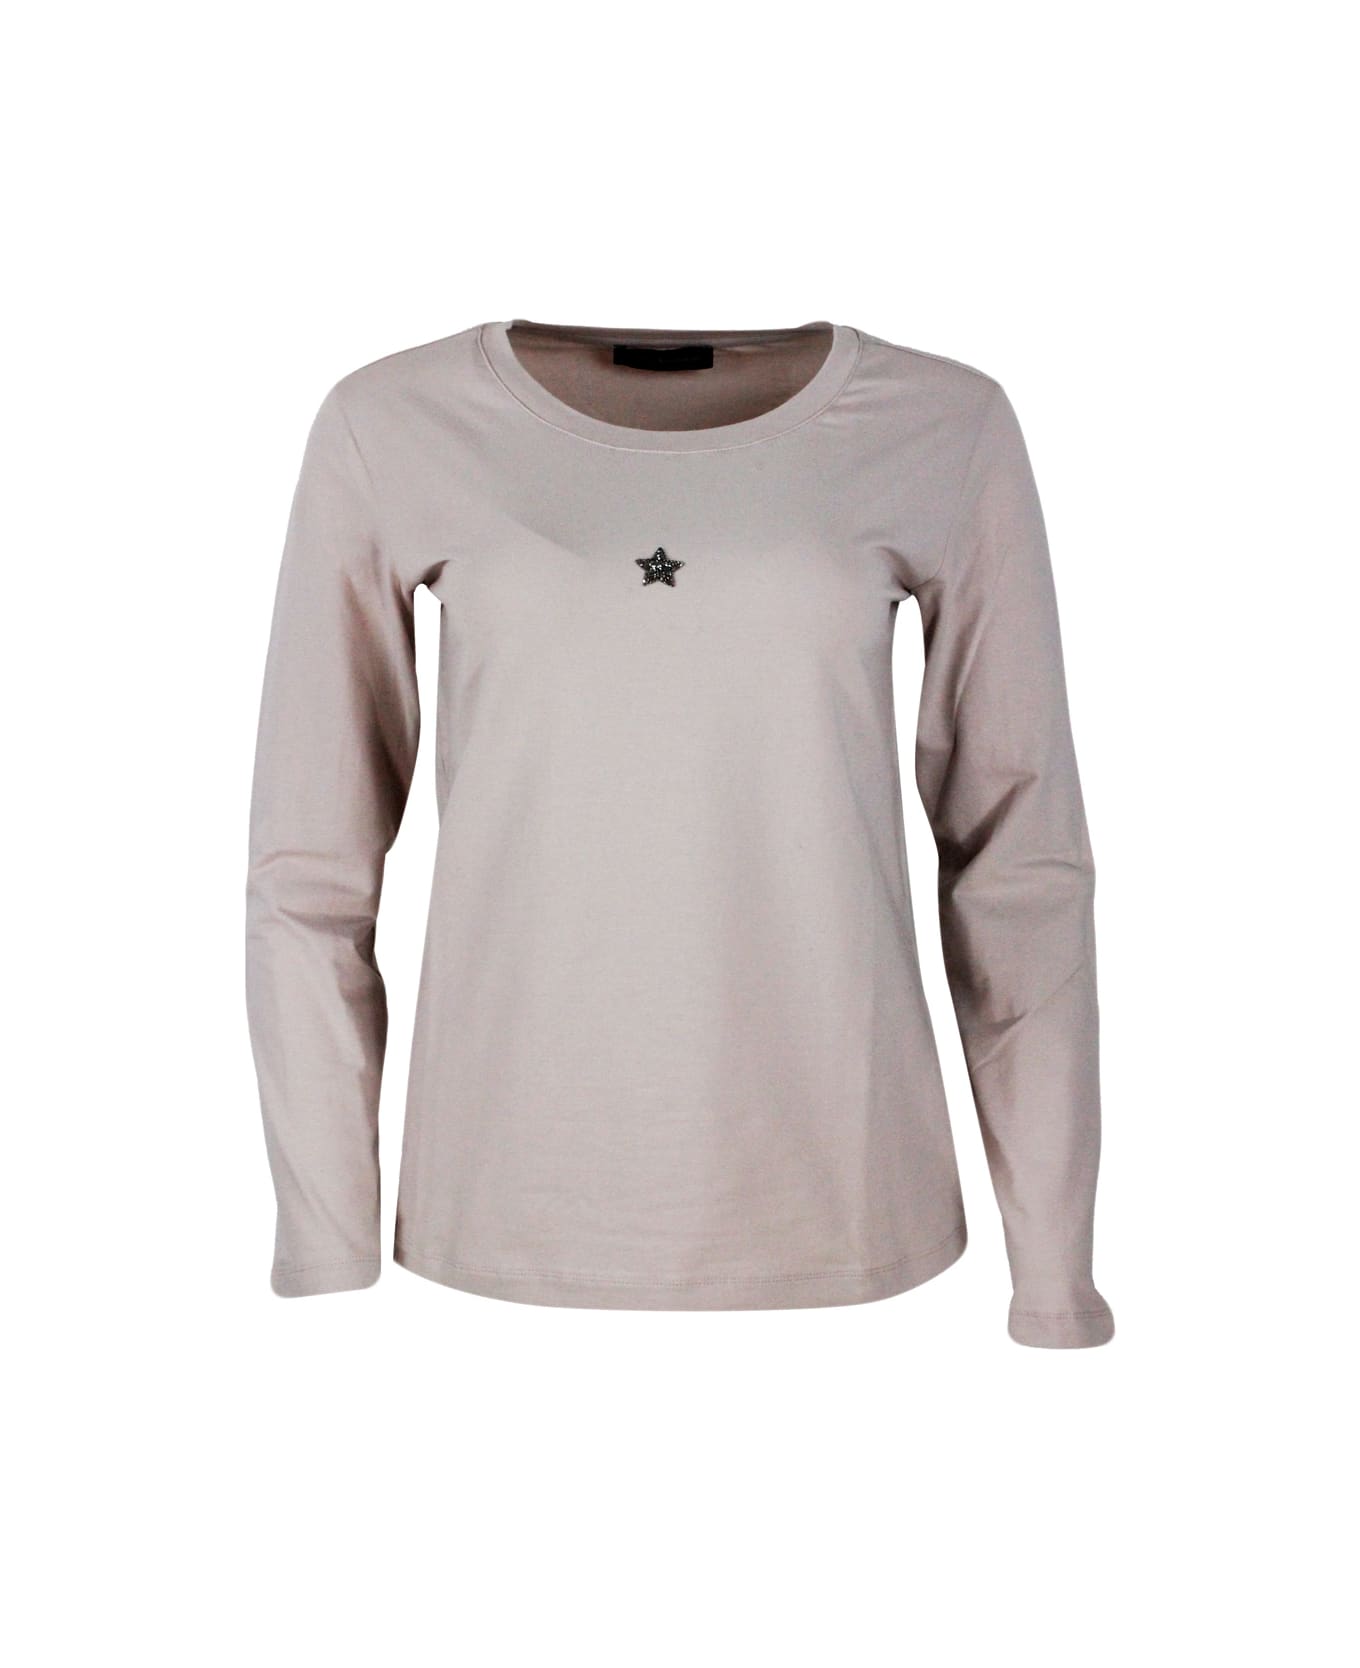 Lorena Antoniazzi Long-sleeved Crew-neck T-shirt In Stretch Cotton With Swarosky Star On The Chest - Pink